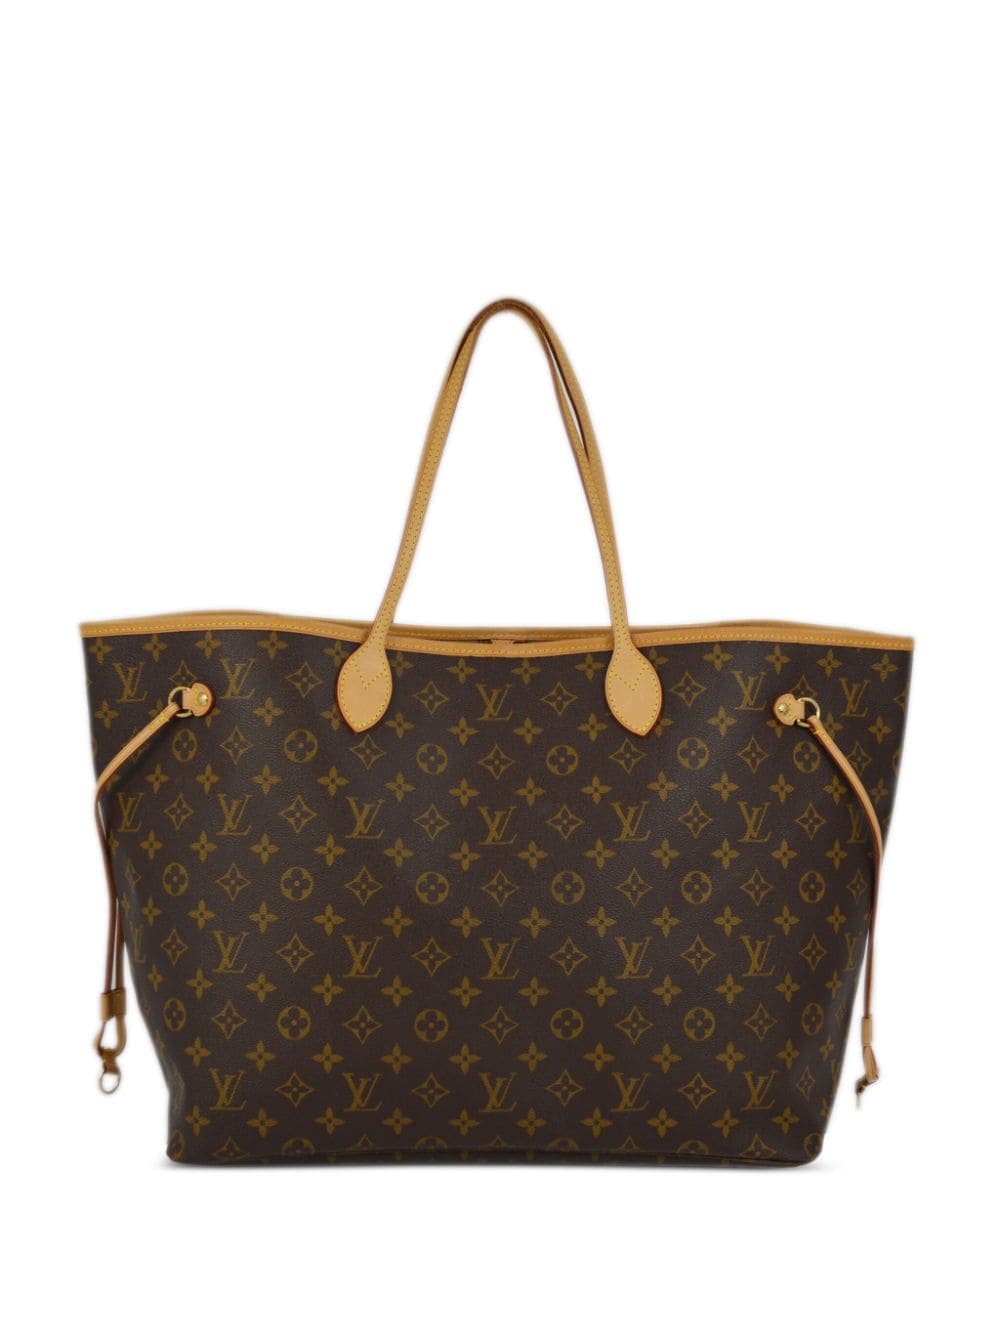 Louis Vuitton Pre-Owned 2008 GM Neverfull Handtasche - Braun von Louis Vuitton Pre-Owned